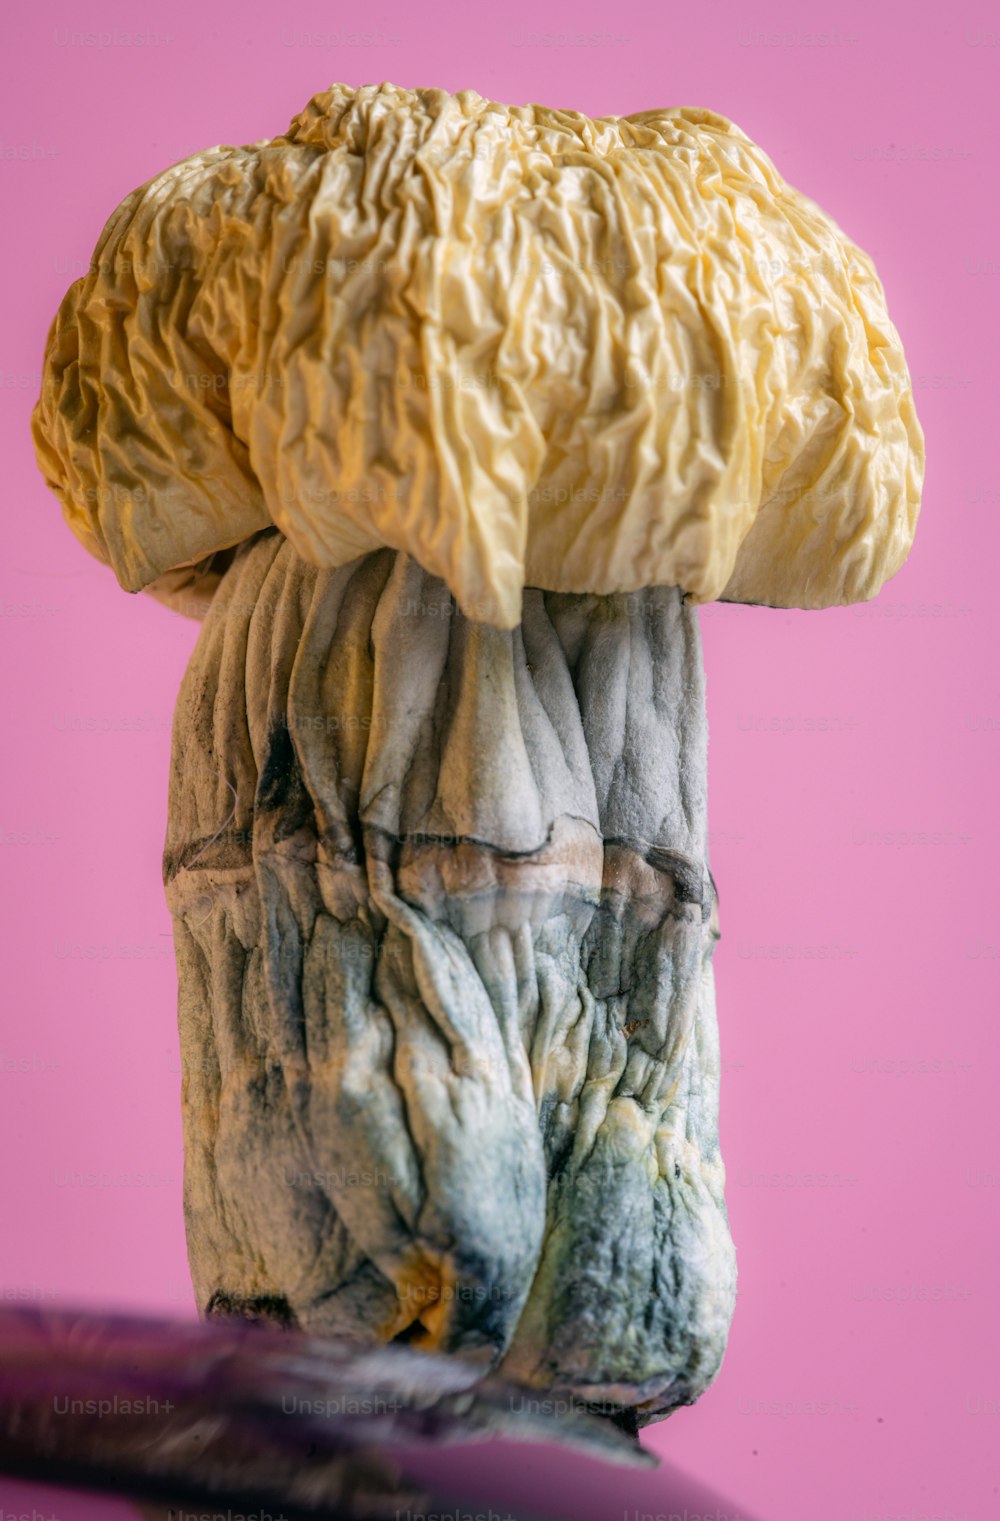 a close up of a mushroom on a pink background